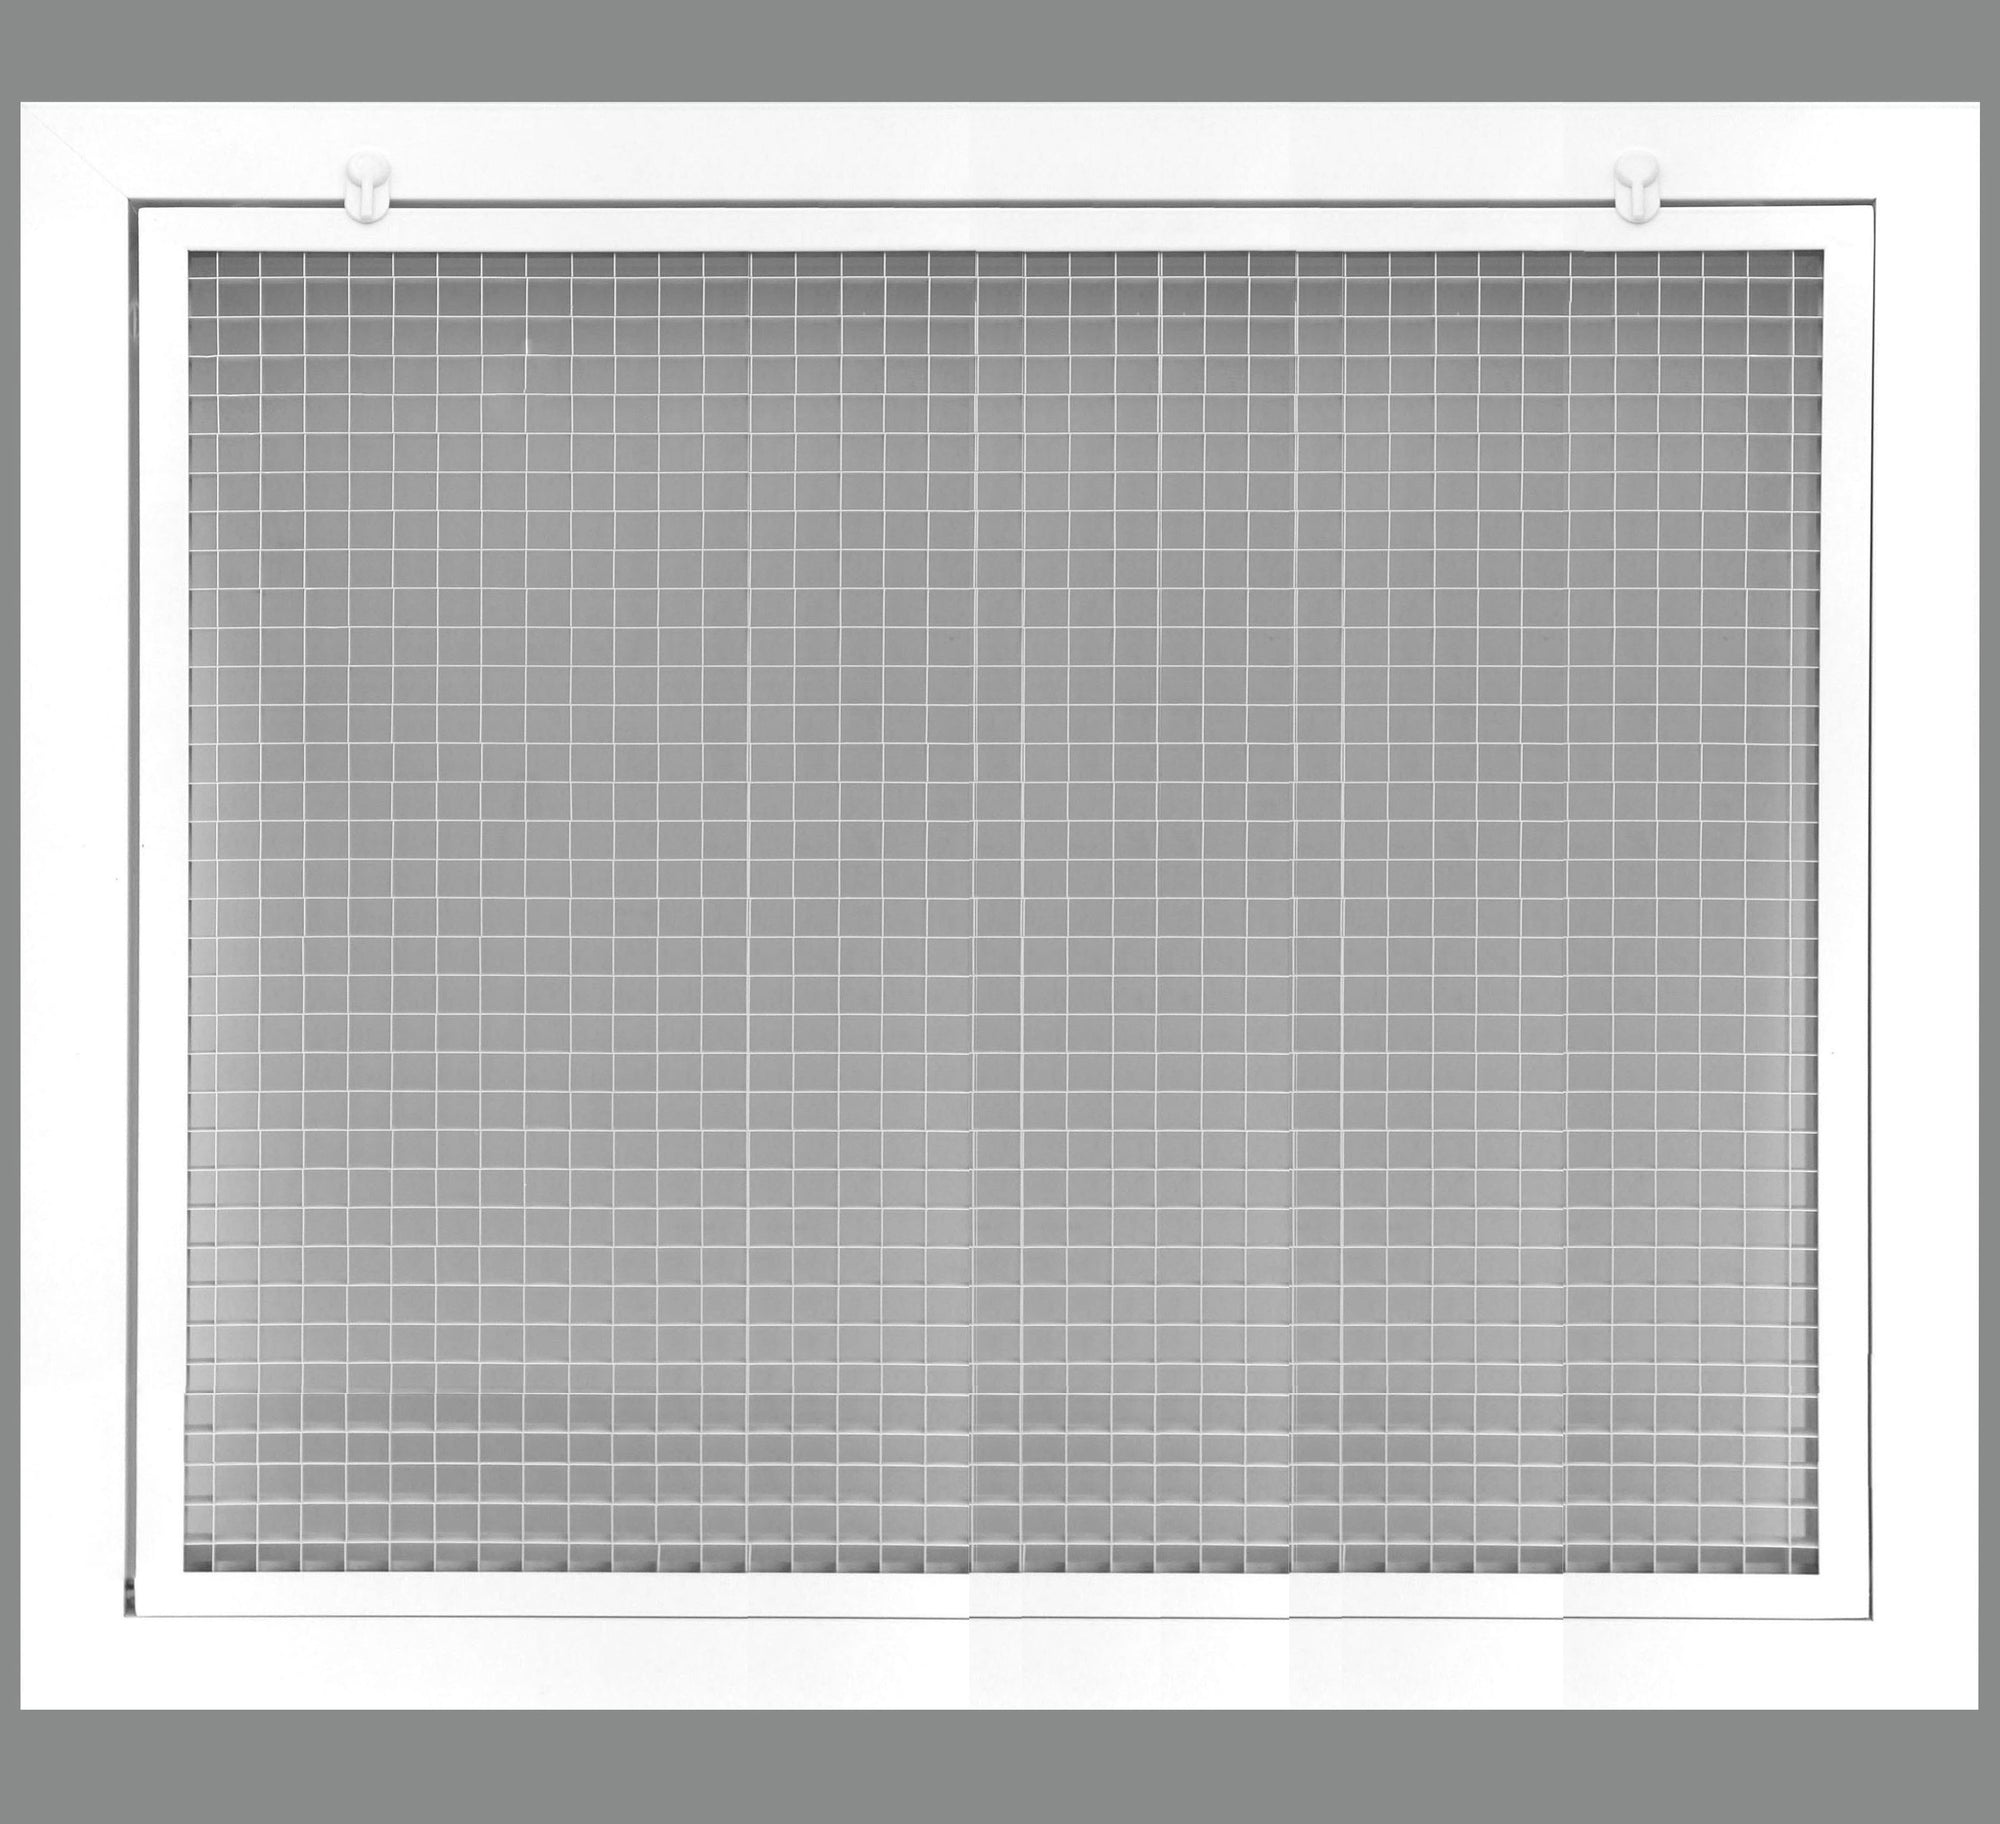 22" x 20" Cube Core Eggcrate Return Air Filter Grille for 1" Filter